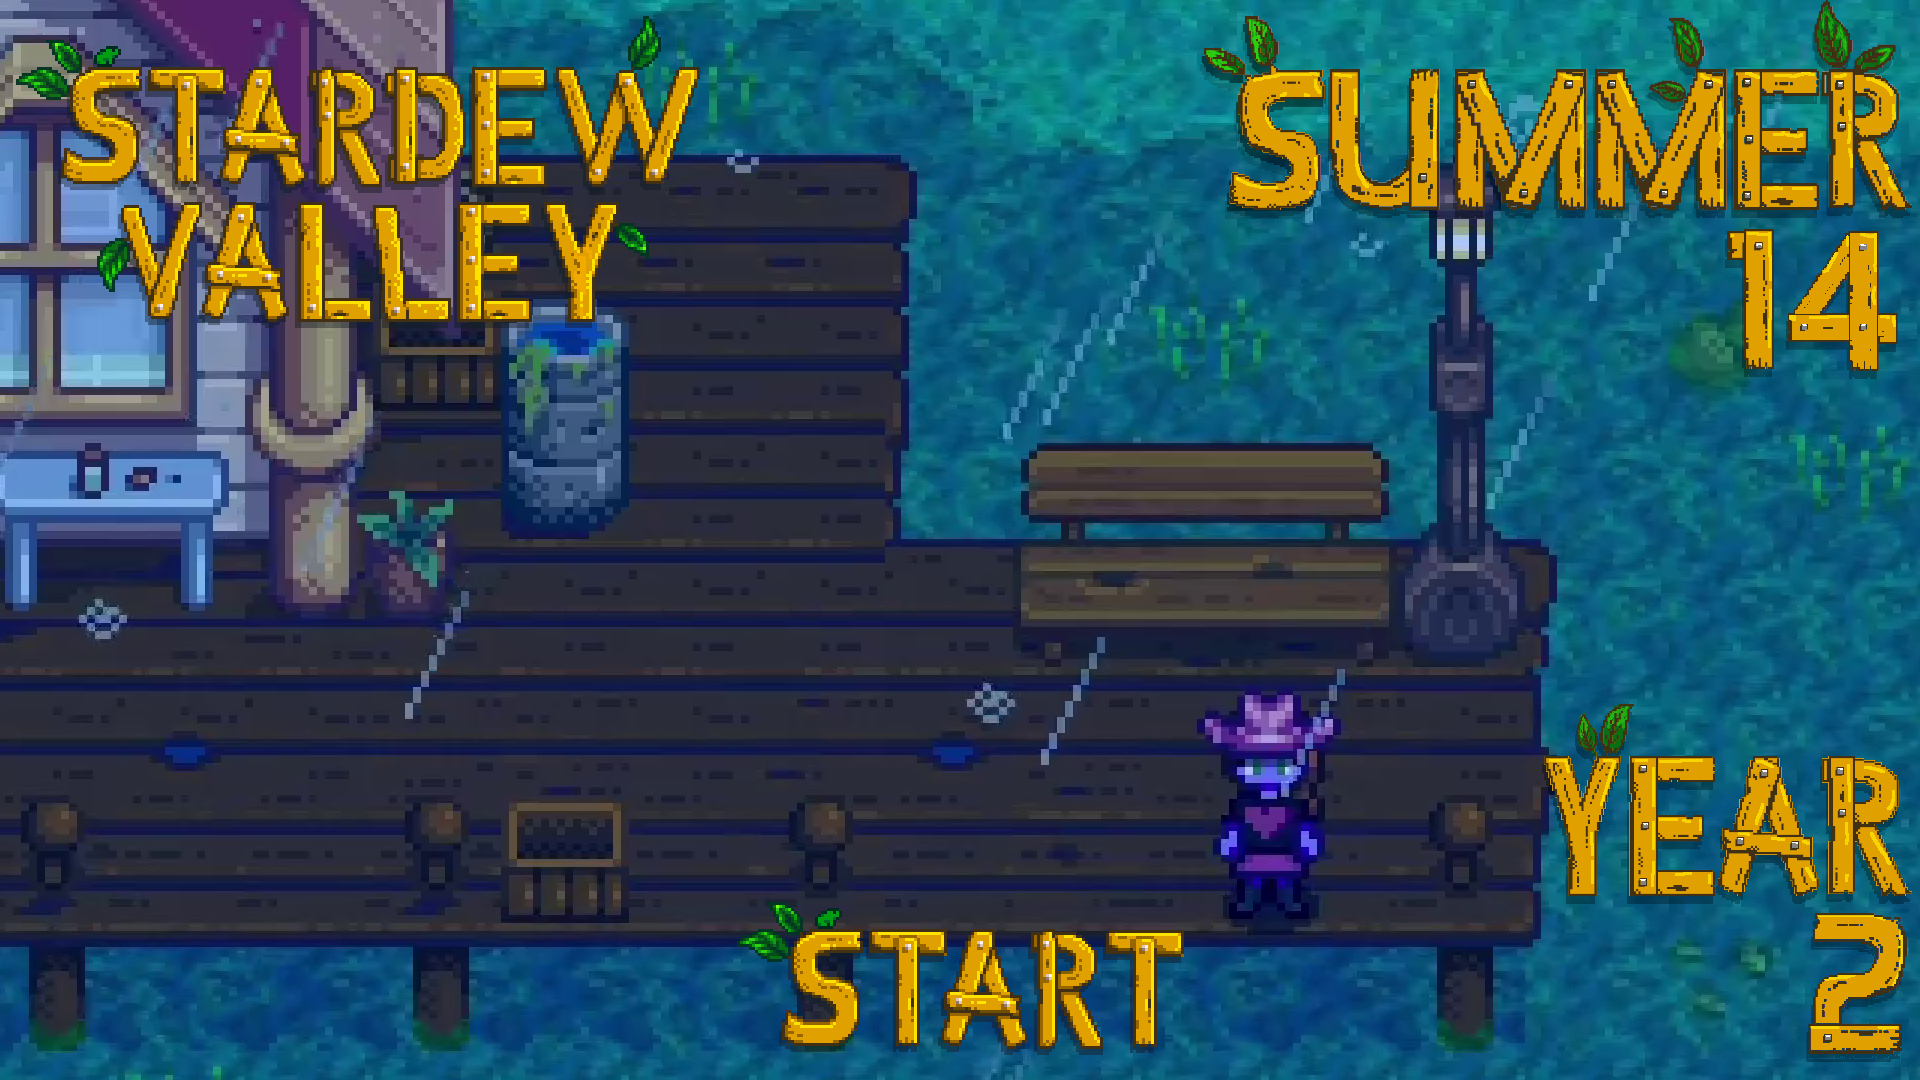 Making Hay While The Sun Doesn’t Shines – Stardew Valley, Summer 14, Year 2, Start